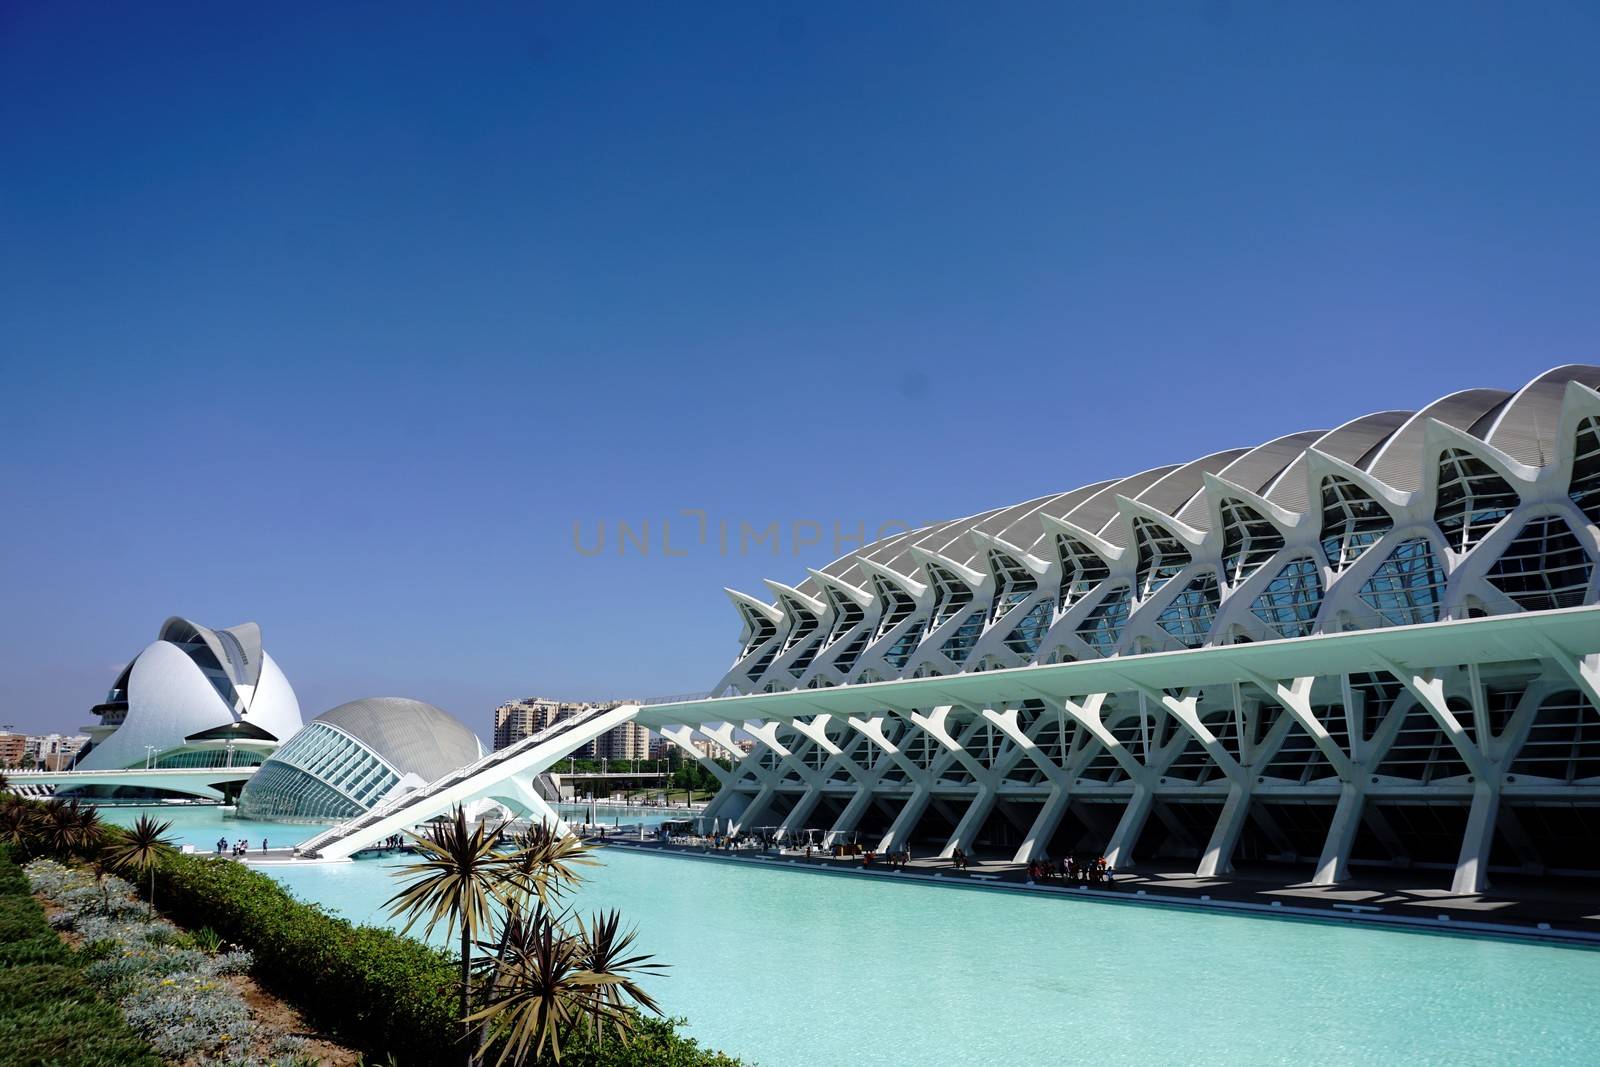 View over the City of Arts and Sciences, Valencia Spain by pisces2386